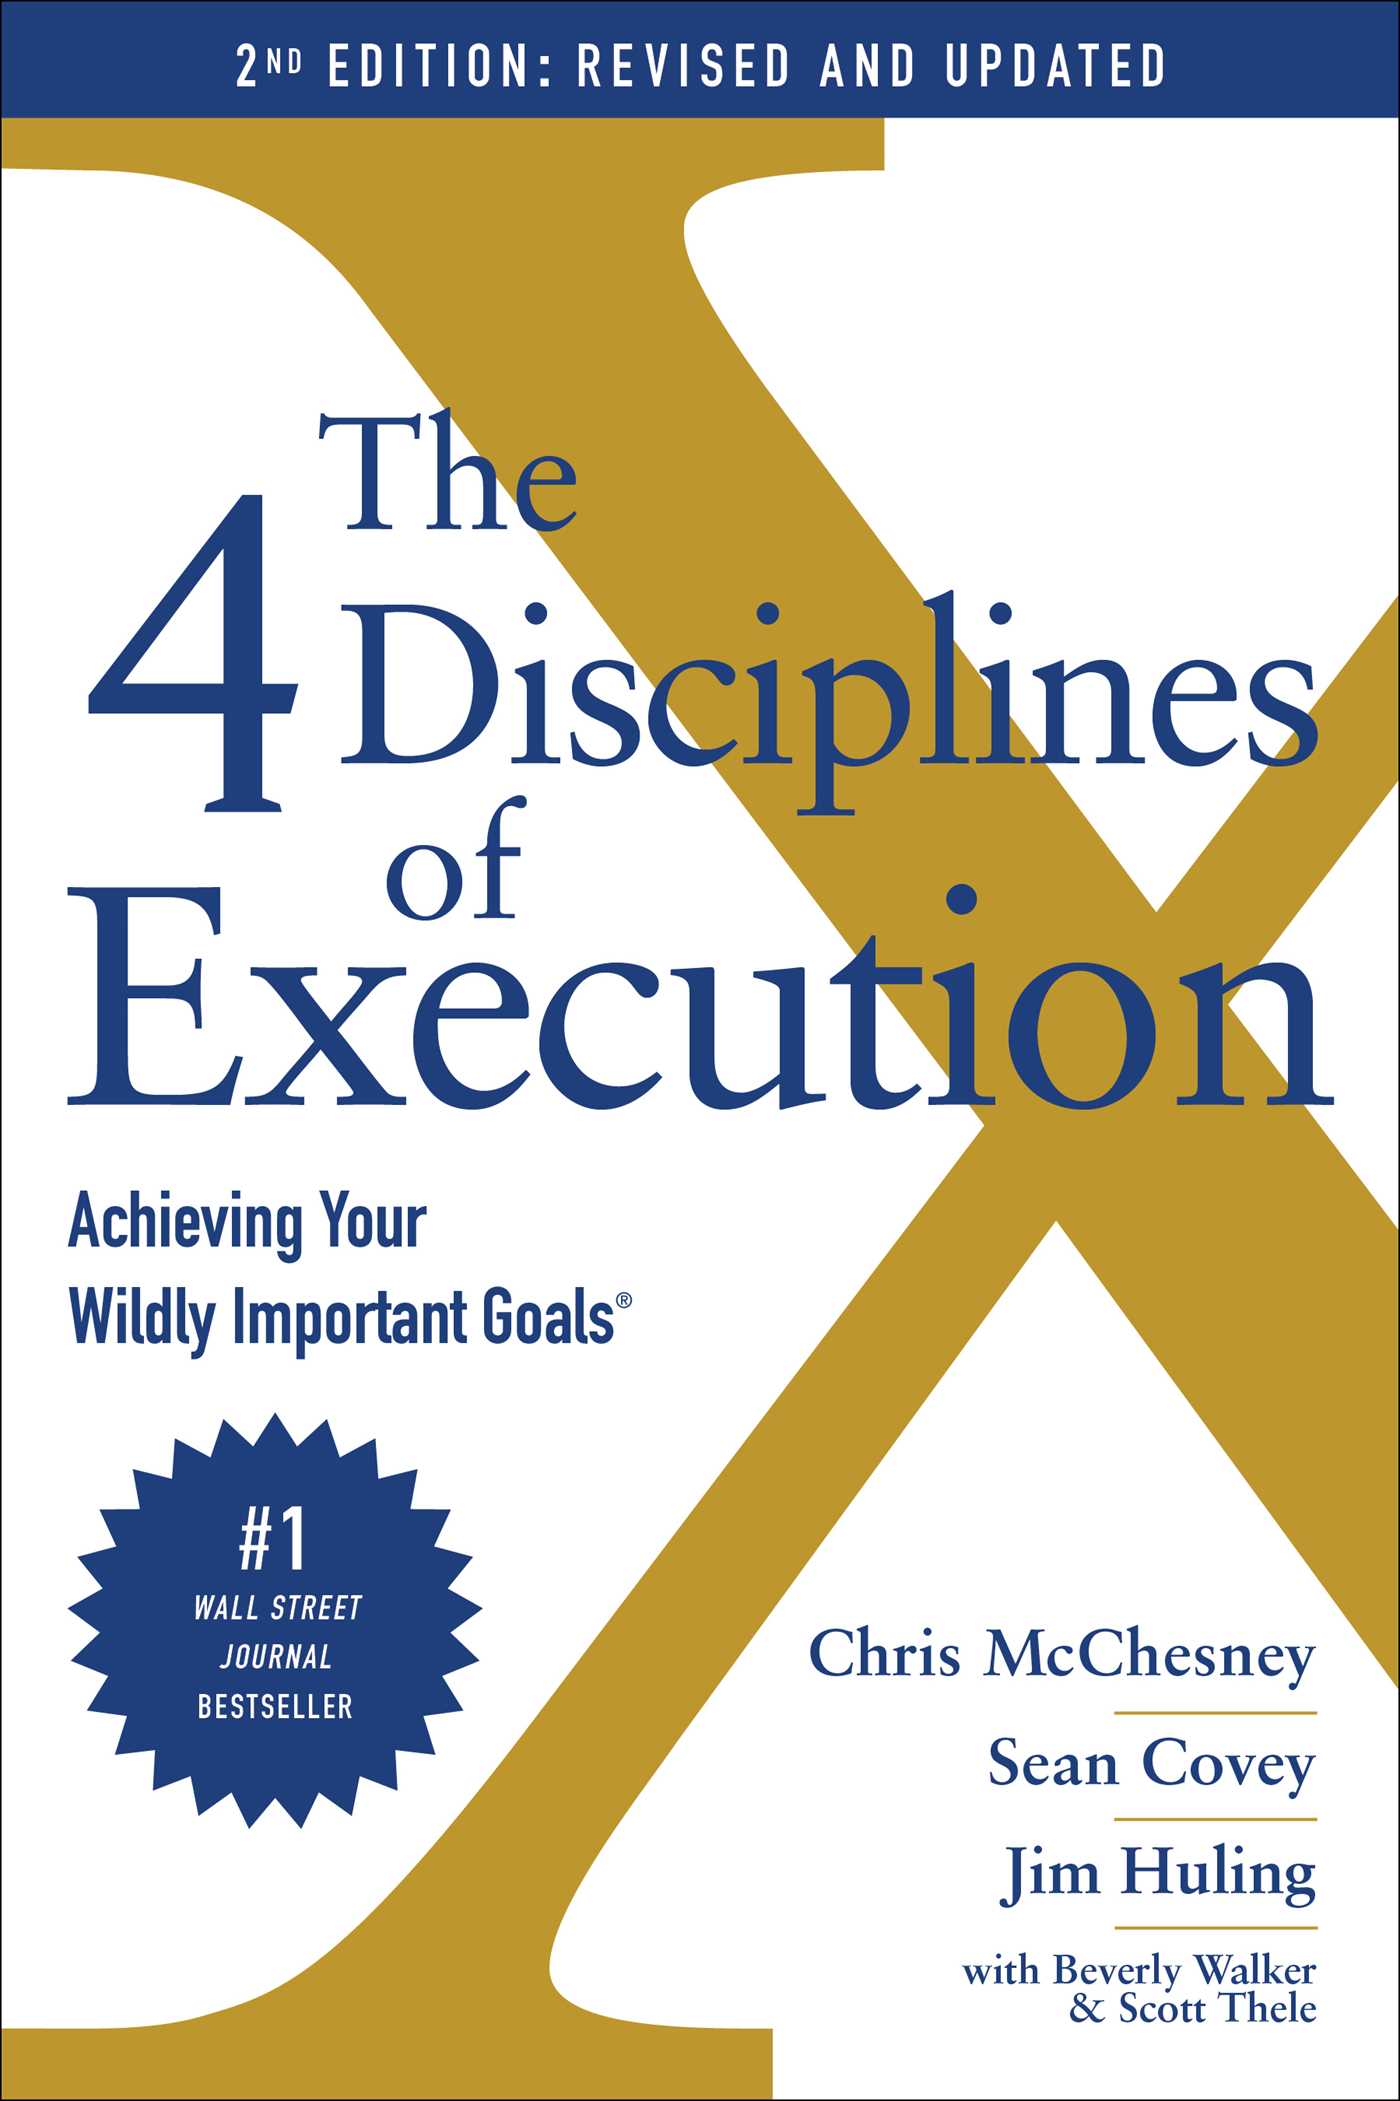 The 4 Disciplines of Execution: Revised and Updated Achieving Your Wildly Important Goals cover image